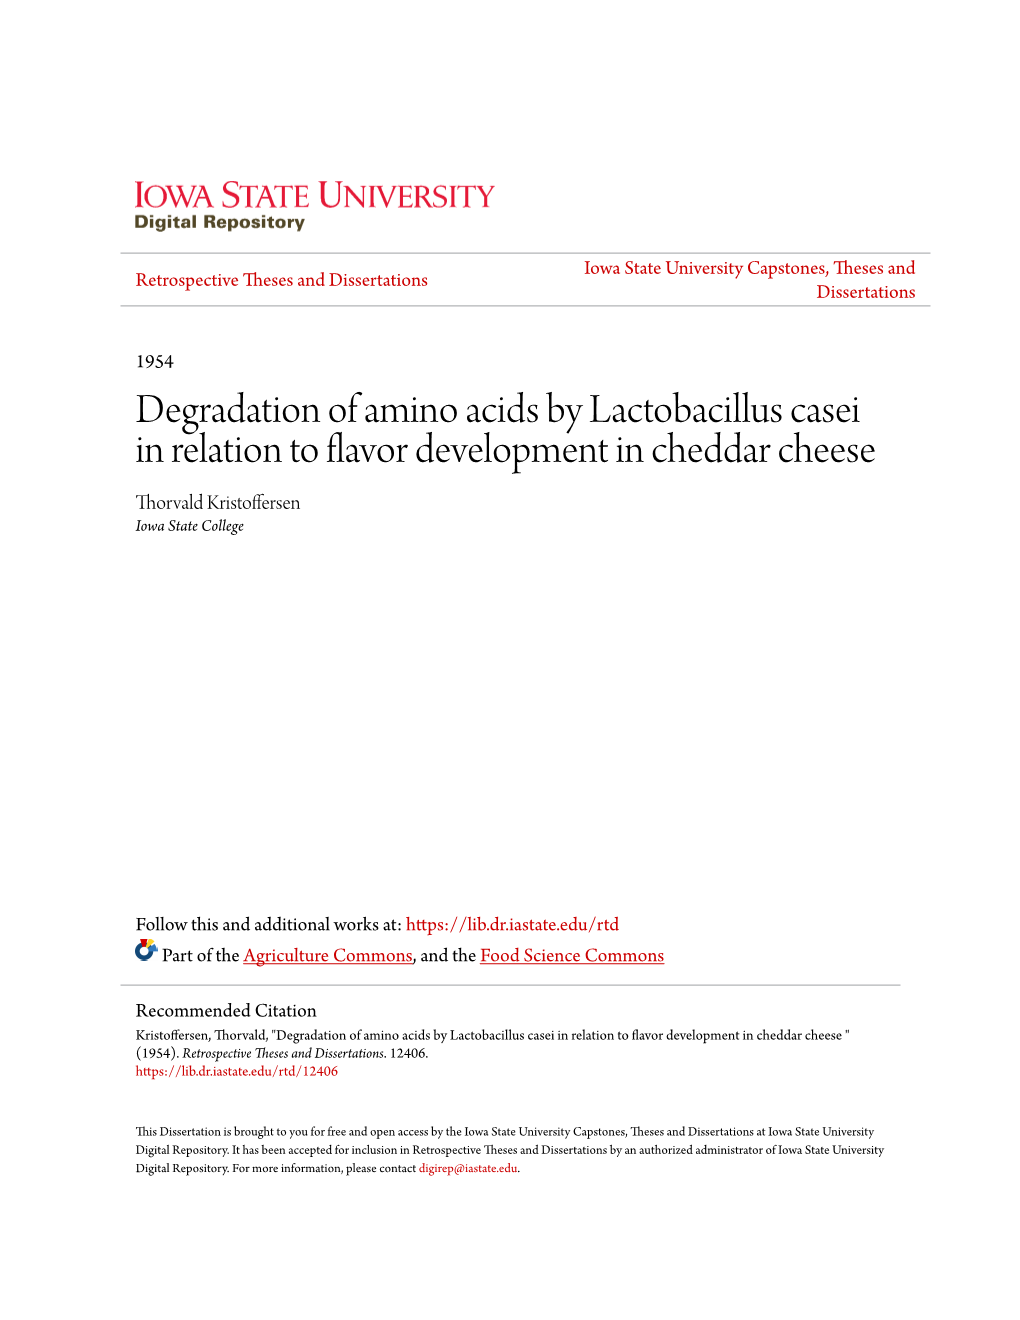 Degradation of Amino Acids by Lactobacillus Casei in Relation to Flavor Development in Cheddar Cheese Thorvald Kristoffersen Iowa State College